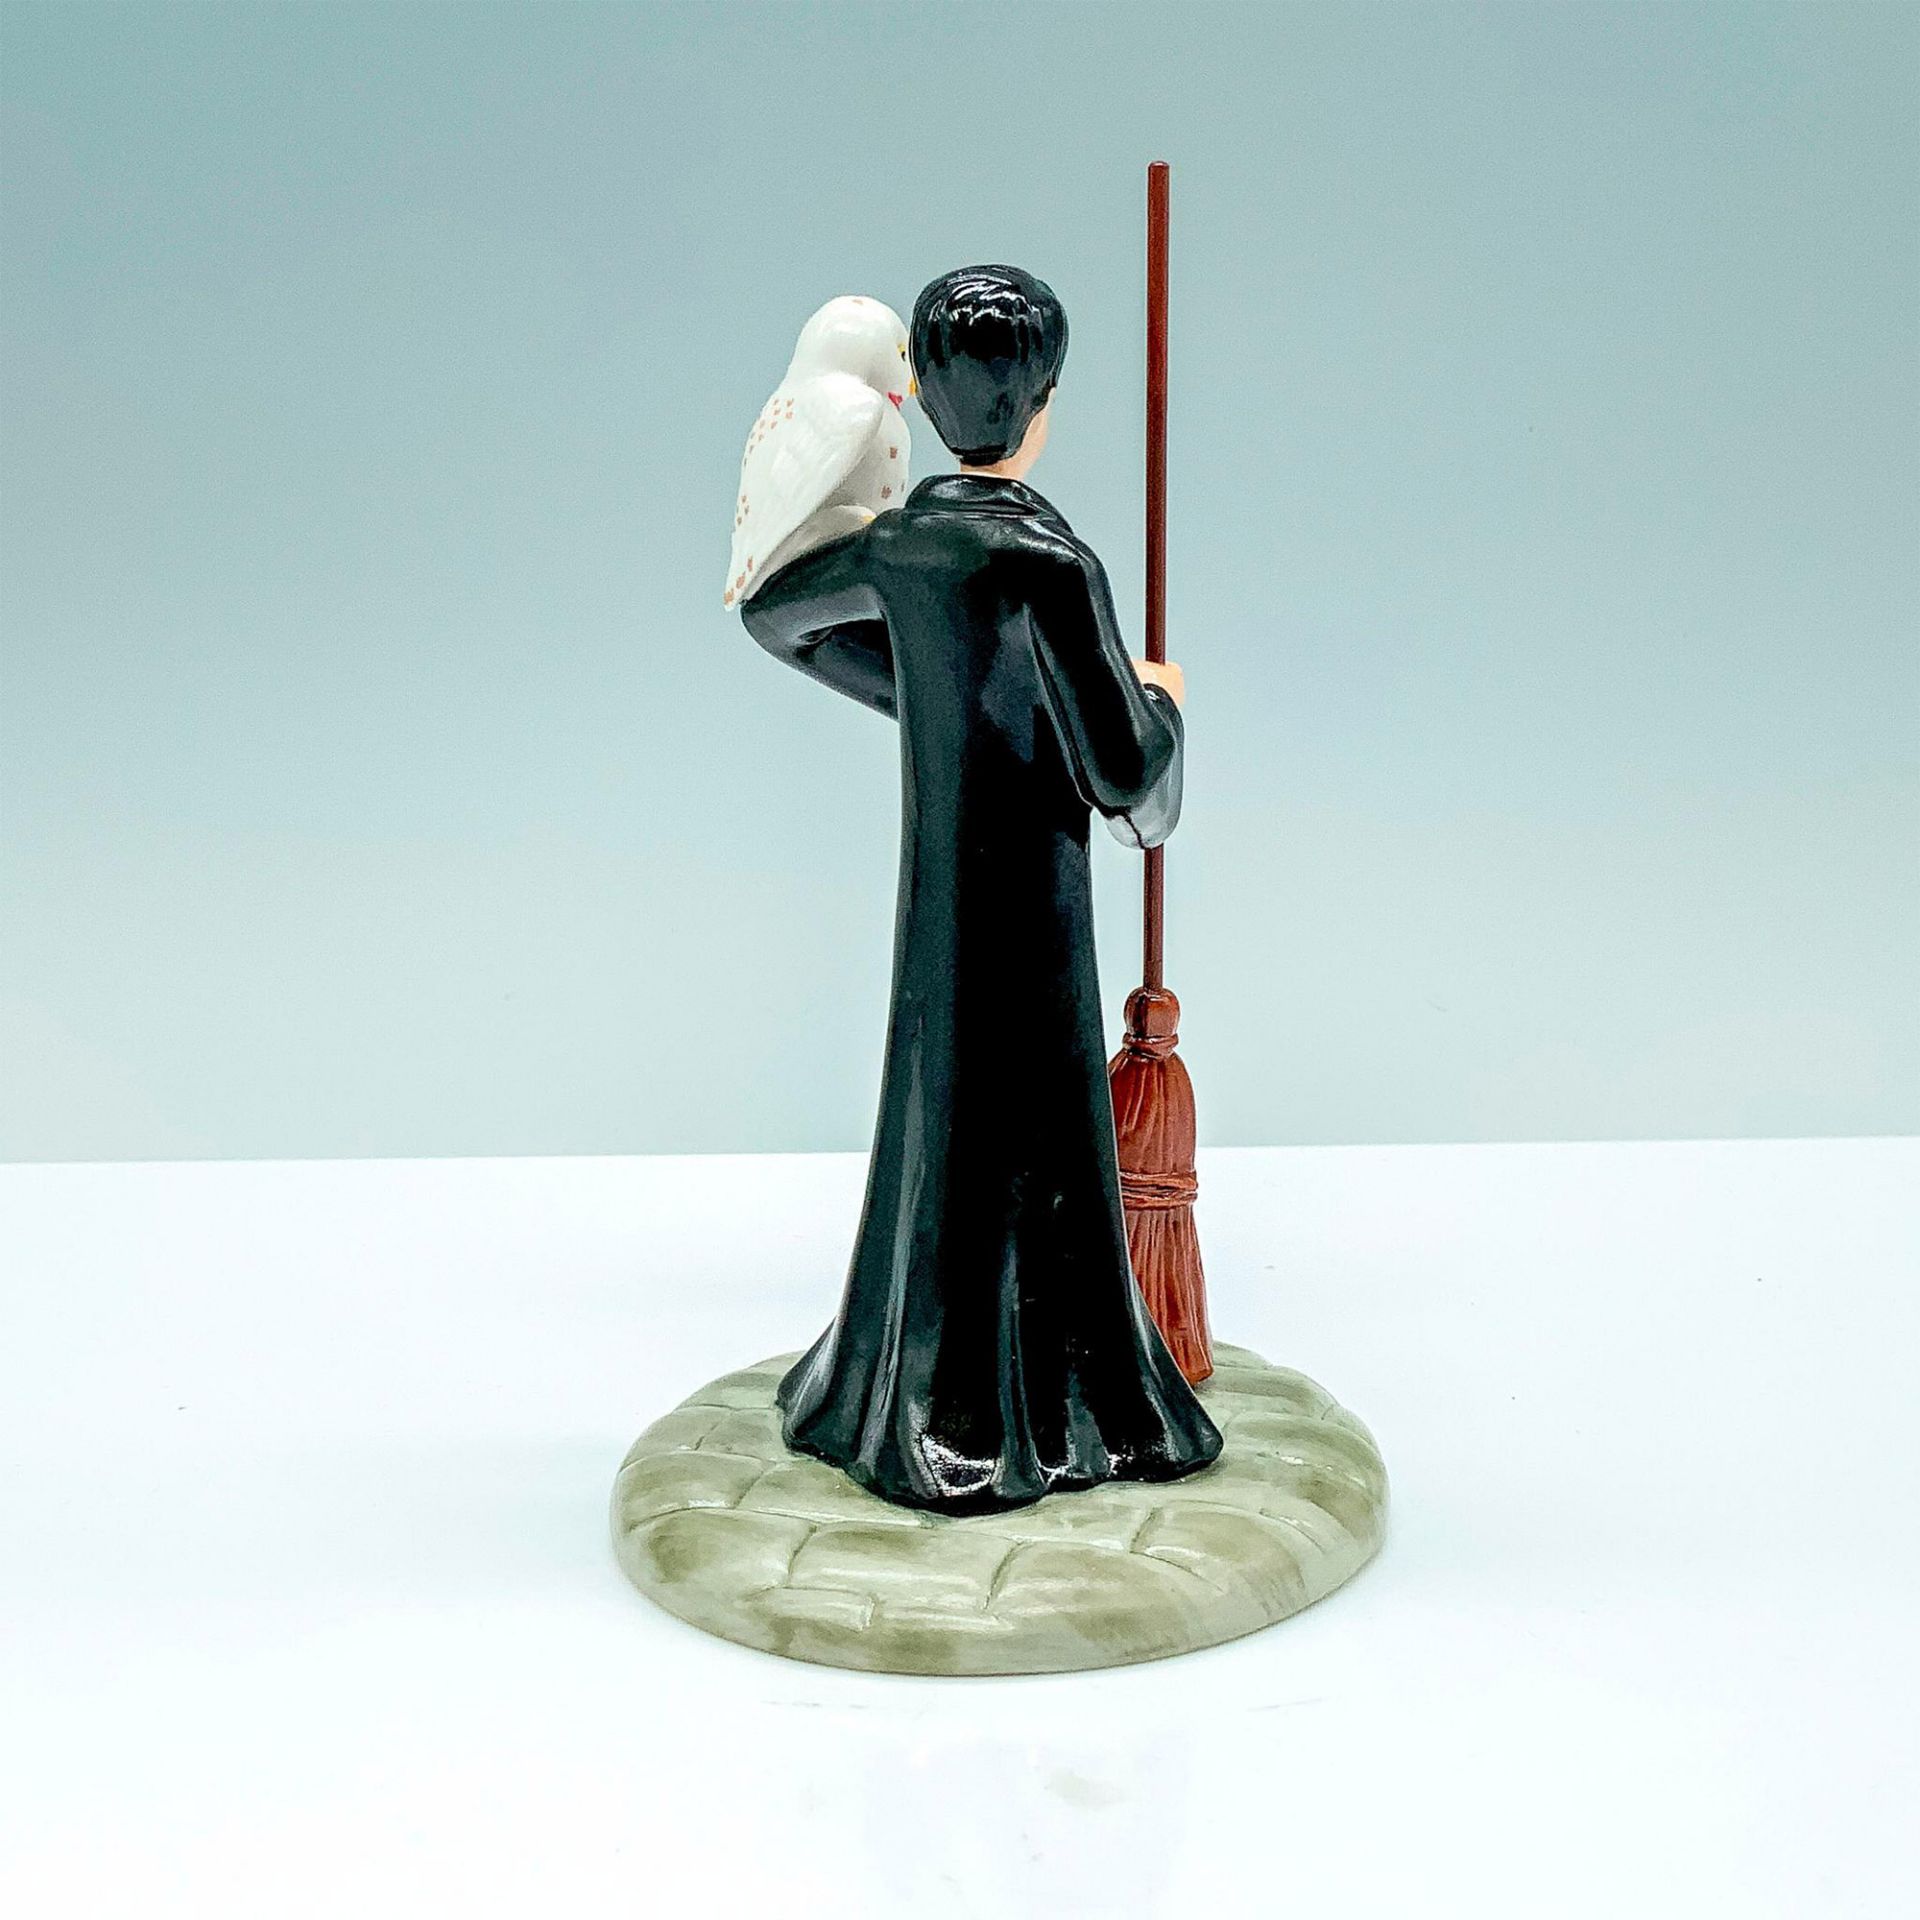 Royal Doulton Harry Potter Figurine, Wizard in Training - Image 2 of 4